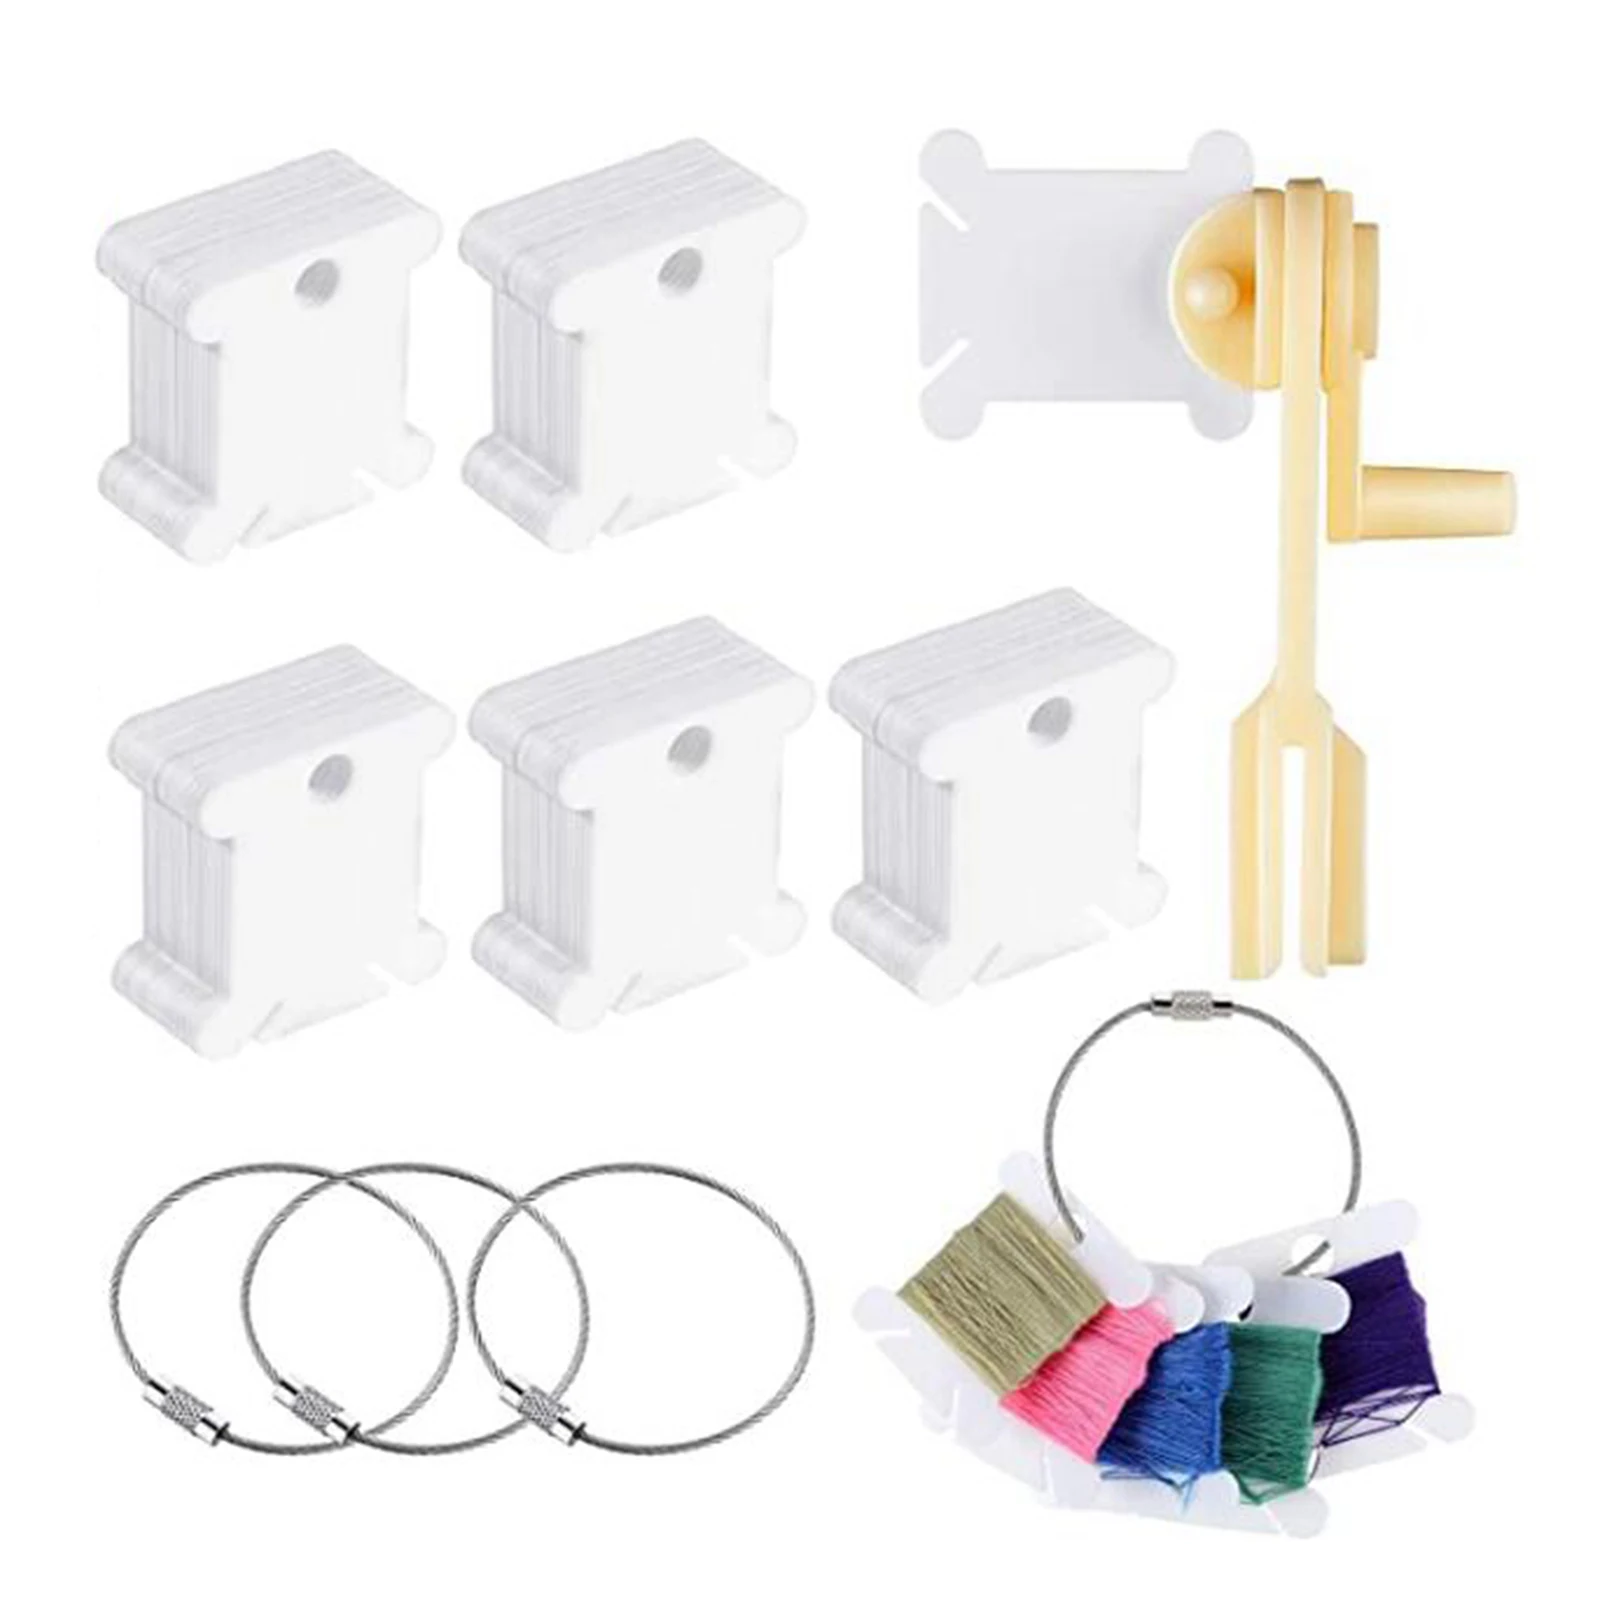 Plastic Floss Bobbins Thread Cards with Floss Winder for Craft Accessories